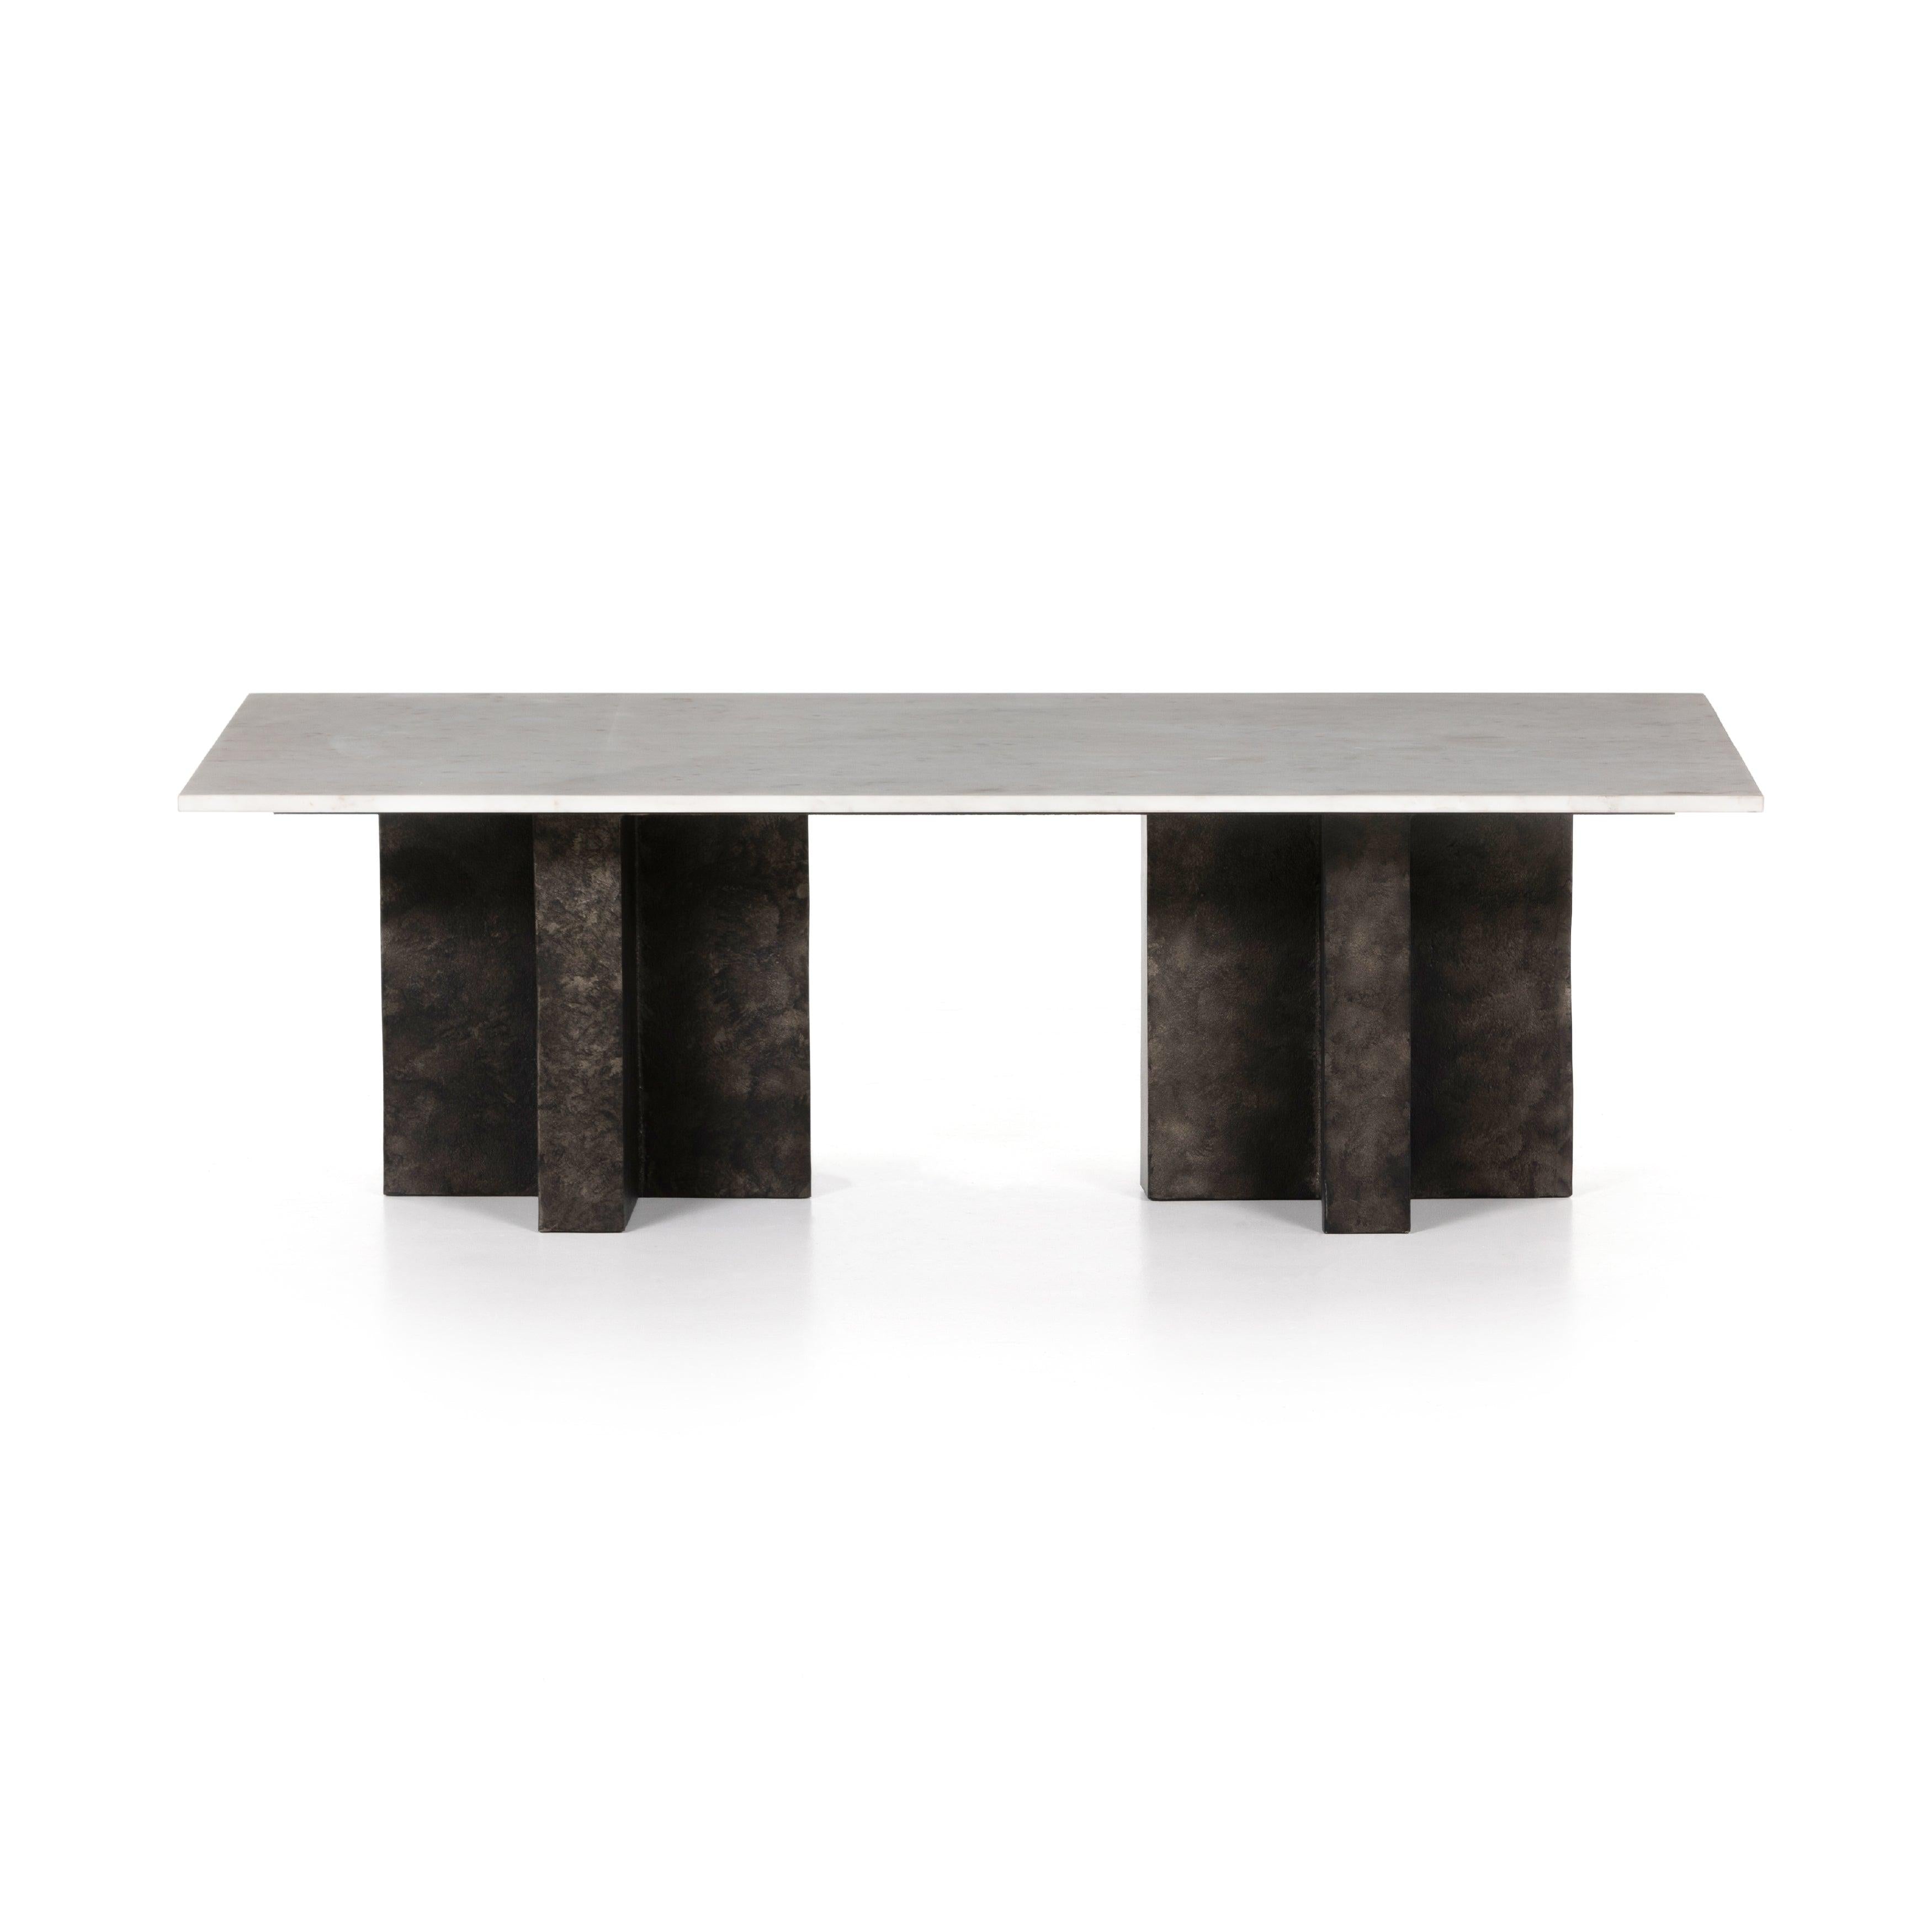 Terrell Coffee Table - Reimagine Designs - coffee table, new